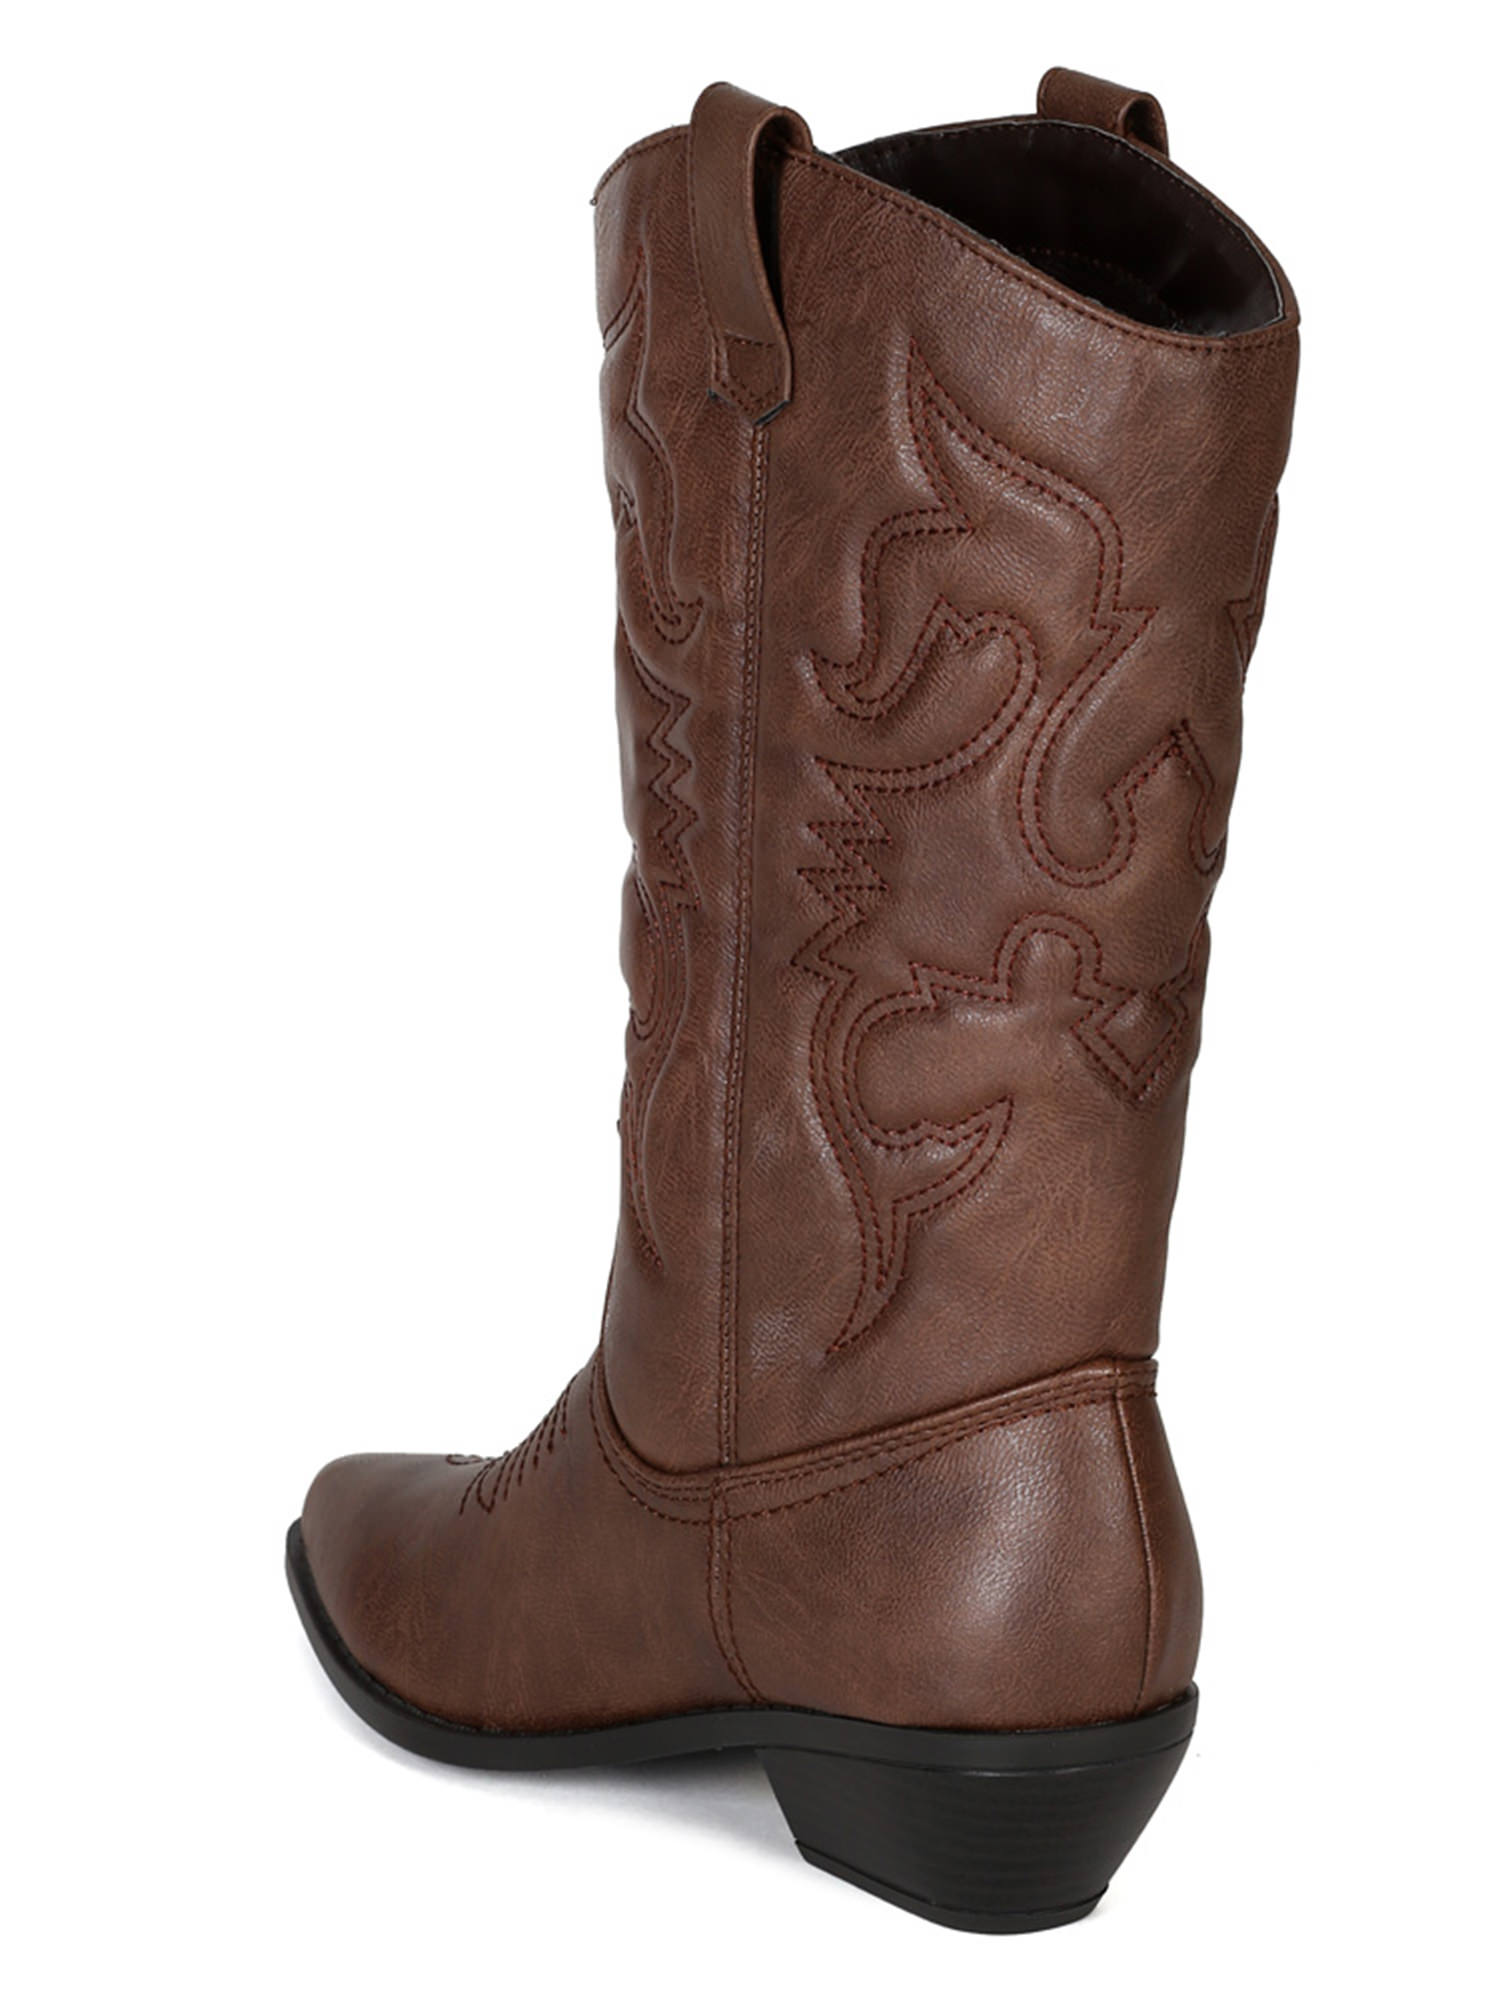 Reno Tan Brwon Soda Cowboy Western Stitched Boots Women Cowgirl Boots Pointy Toe Knee High - image 3 of 3